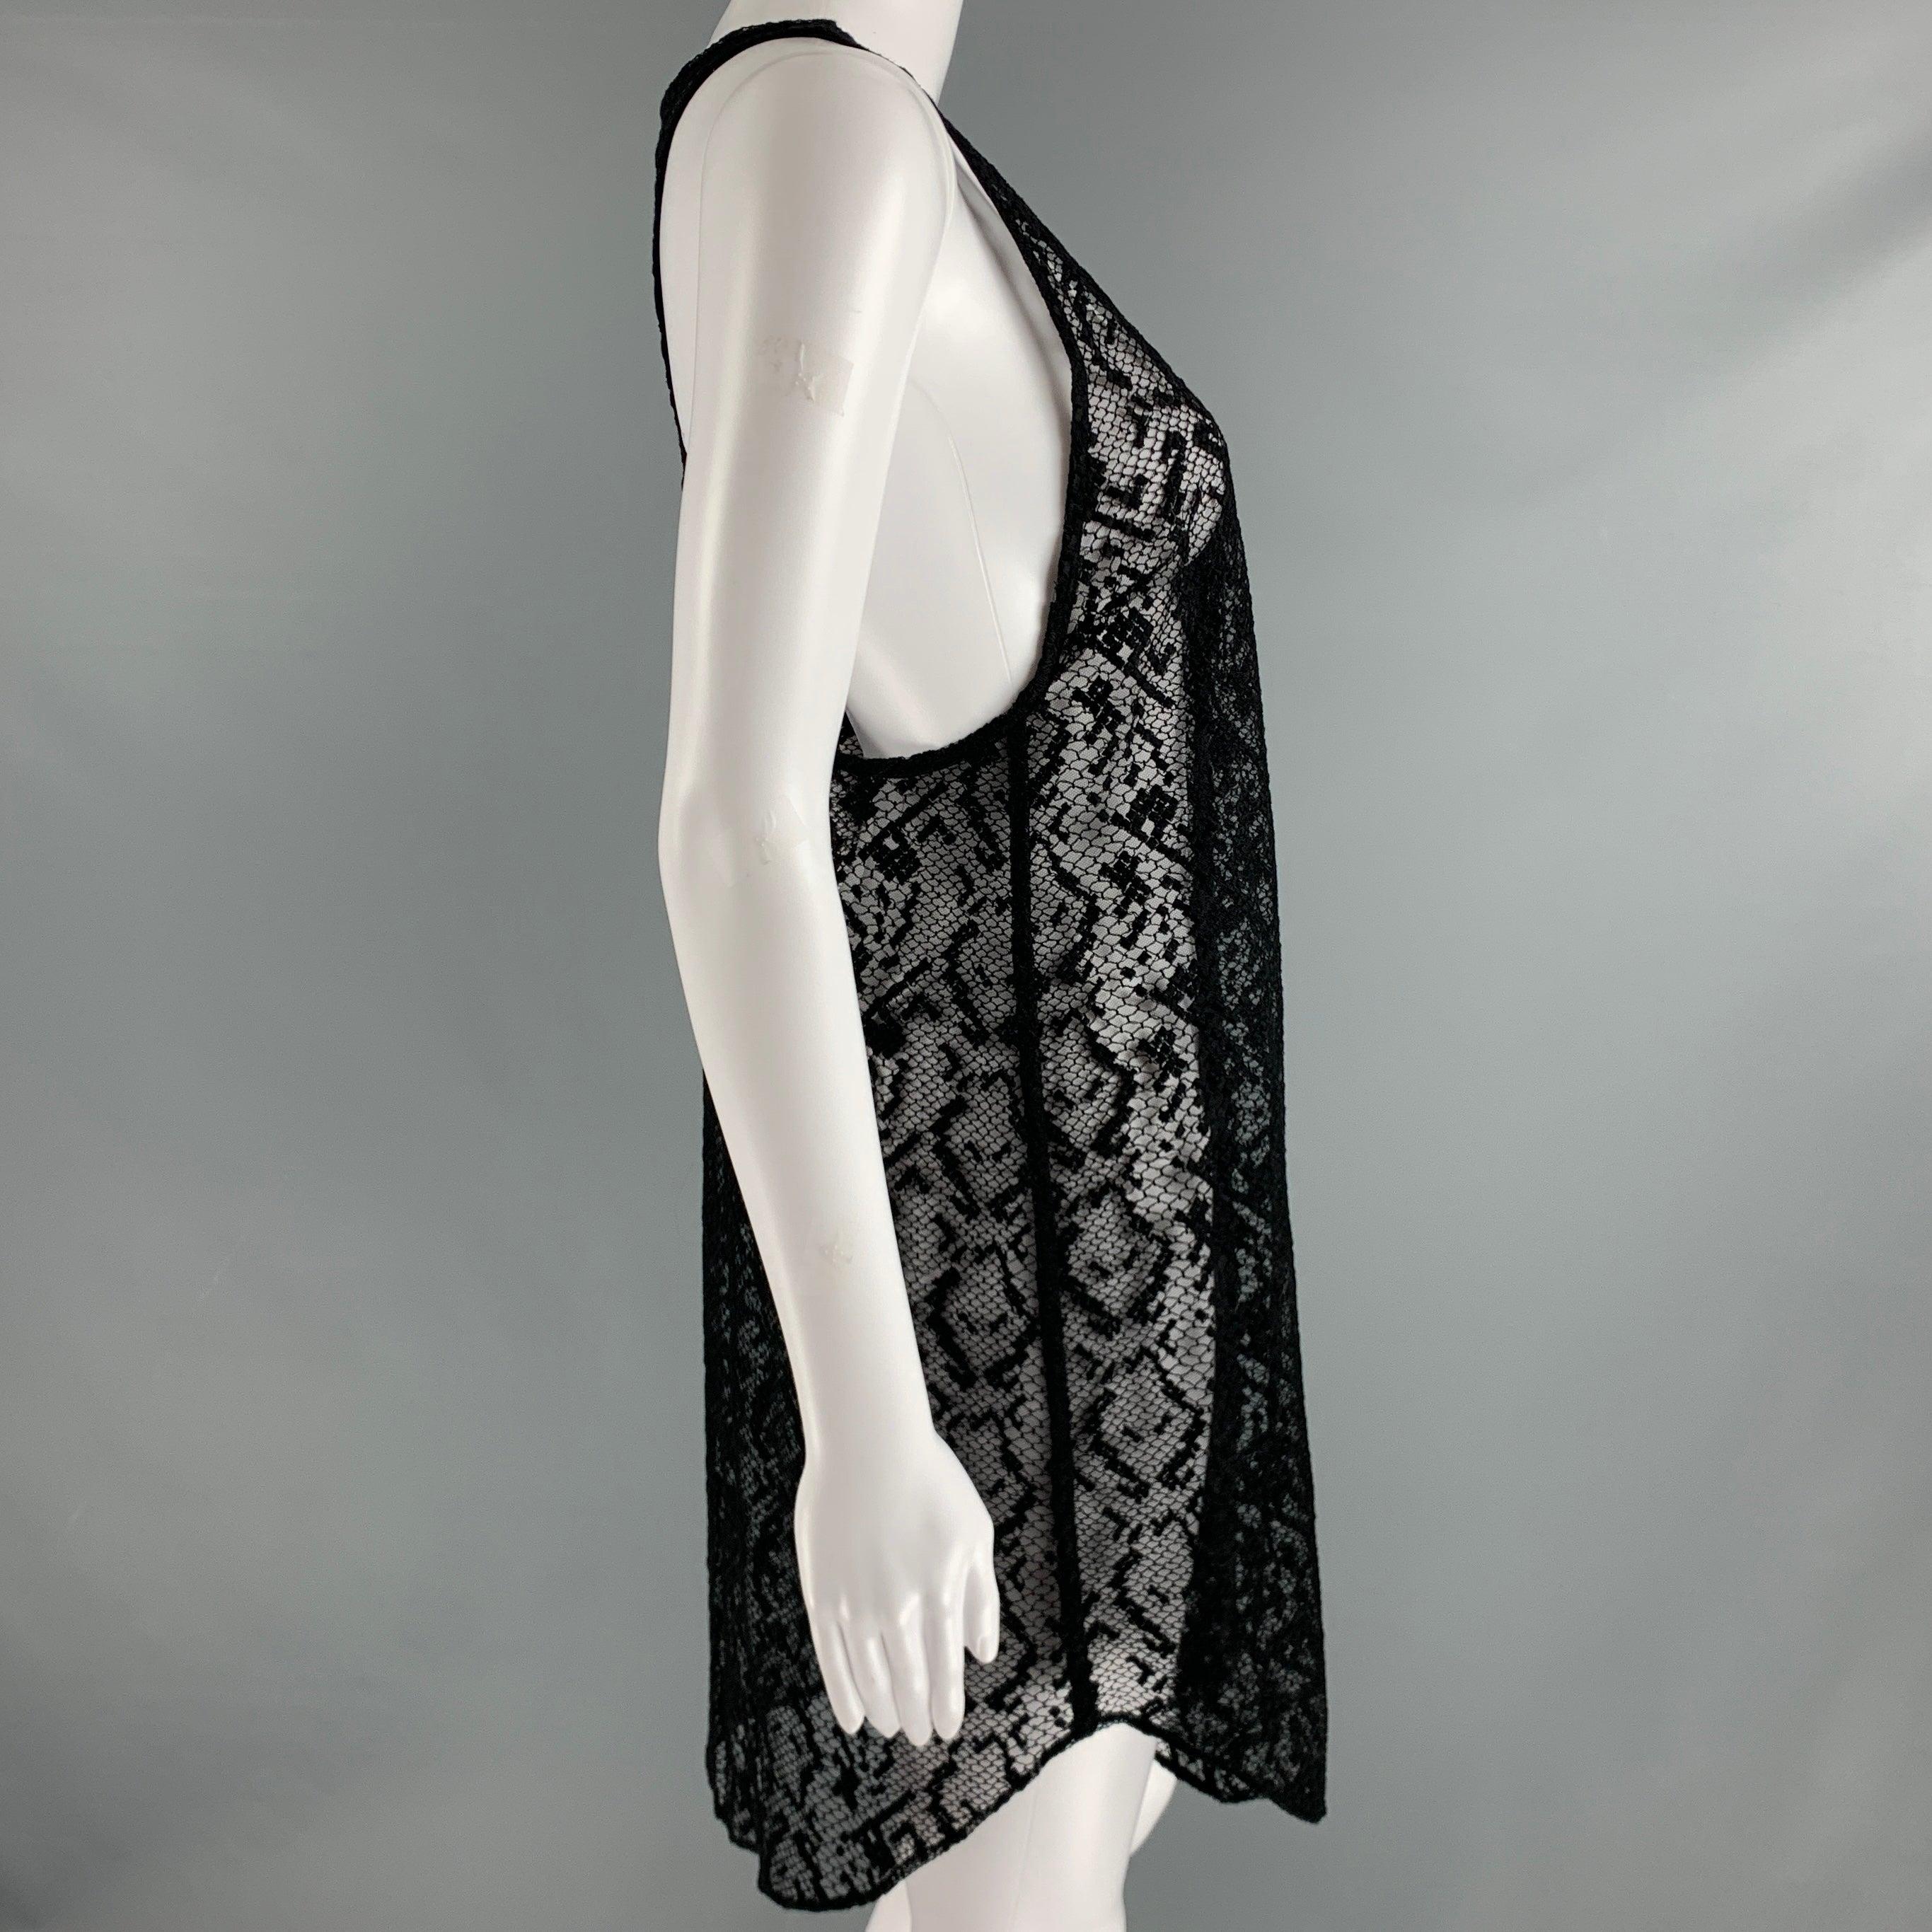 DRIES VAN NOTEN dress
in a black lace fabric featuring a tank style, see through look, and knee length.Excellent Pre-Owned Condition. 

Marked:   38 

Measurements: 
 
Shoulder: 10 inches Bust: 38 inches Length: 33 inches 
  
  
 
Reference No.: